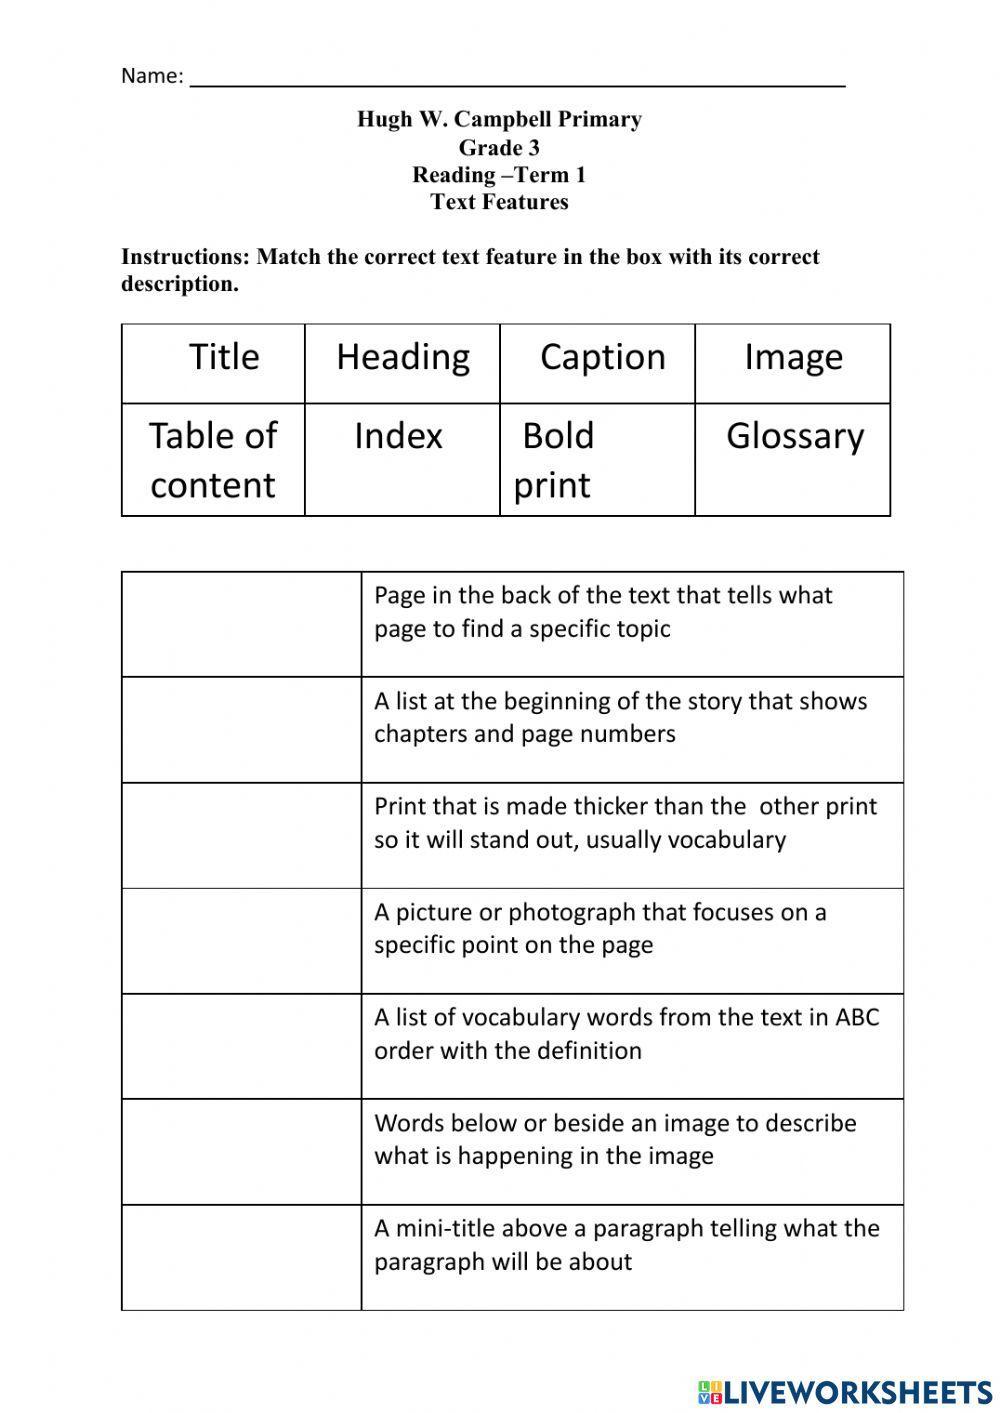 Text Features Review